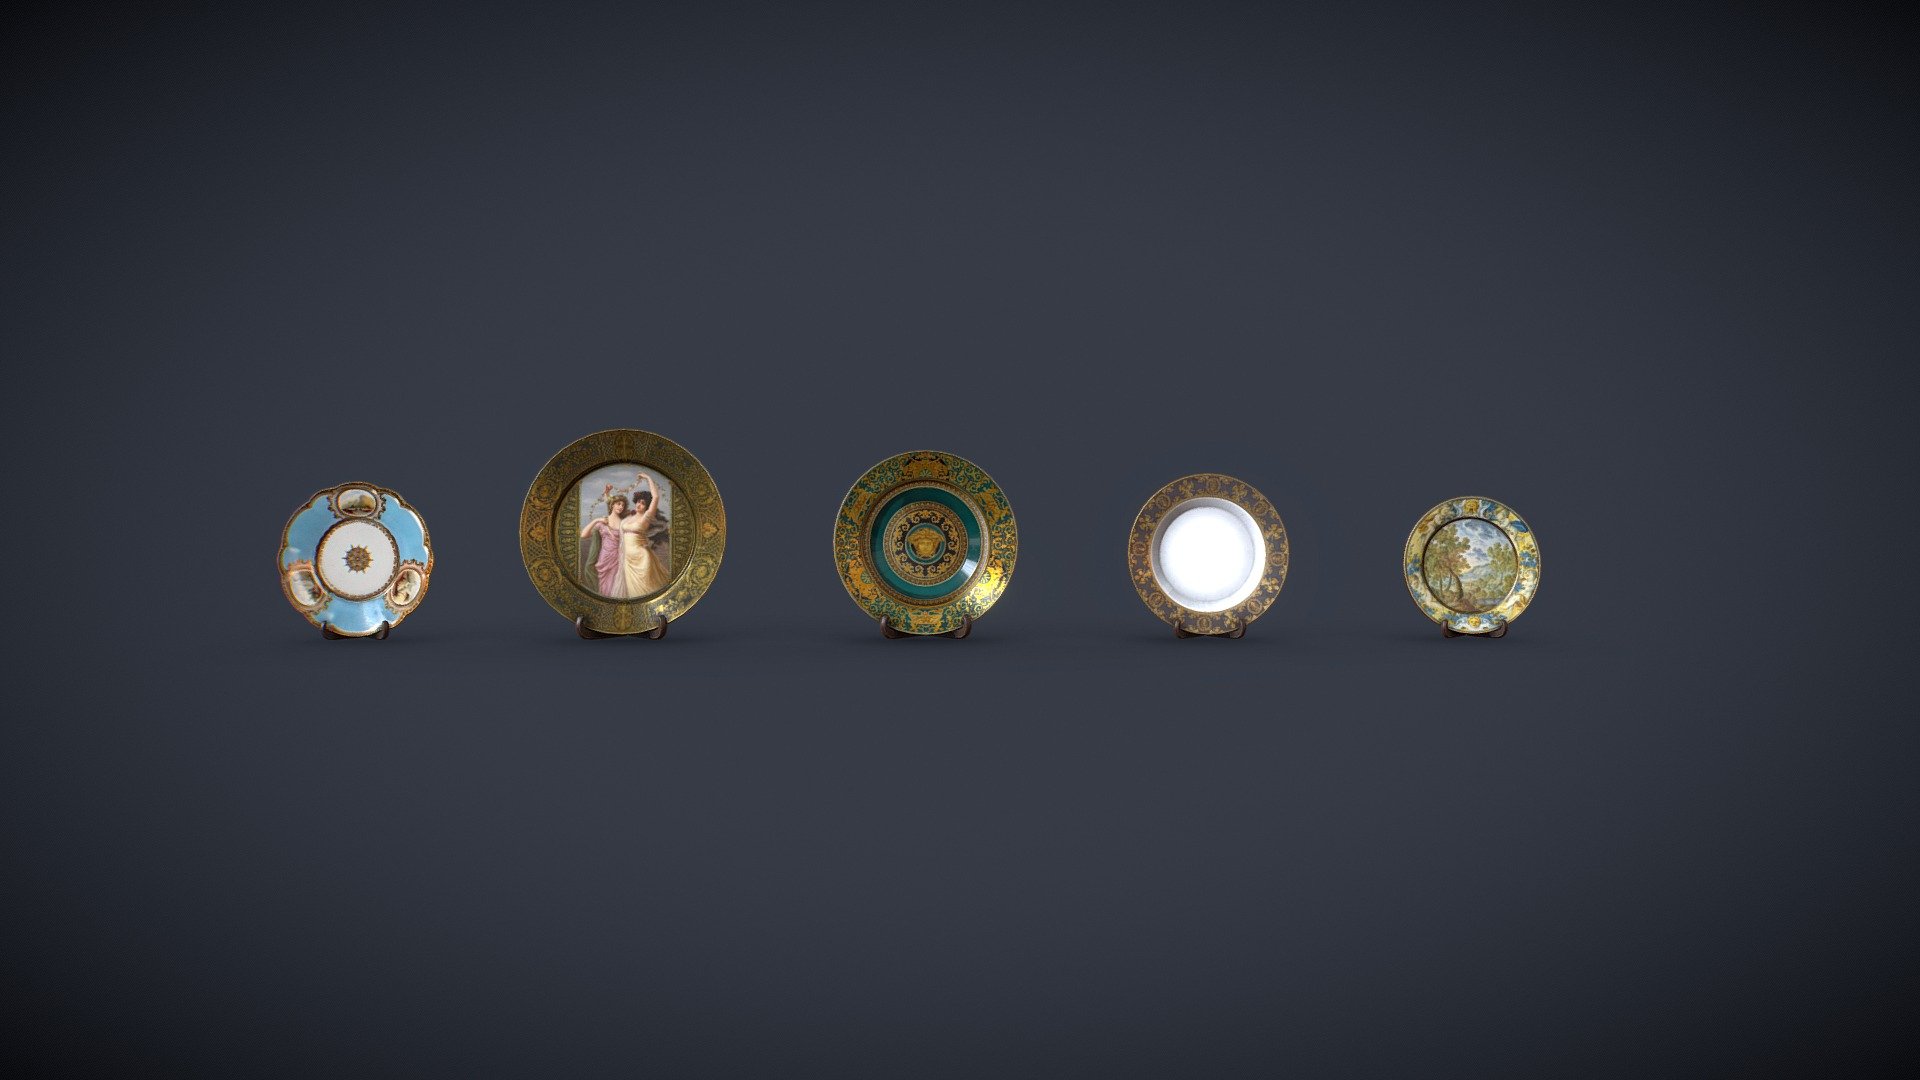 Hello all :) Some simples decoratives plates made for a victorian project that will fit nicely on the top of a shelf.

Made with Maya, PS and Substance.

You will find in the package Scene file, FBX and 2k Textures.
If you have any customs need, please feel free to contact me 3d model